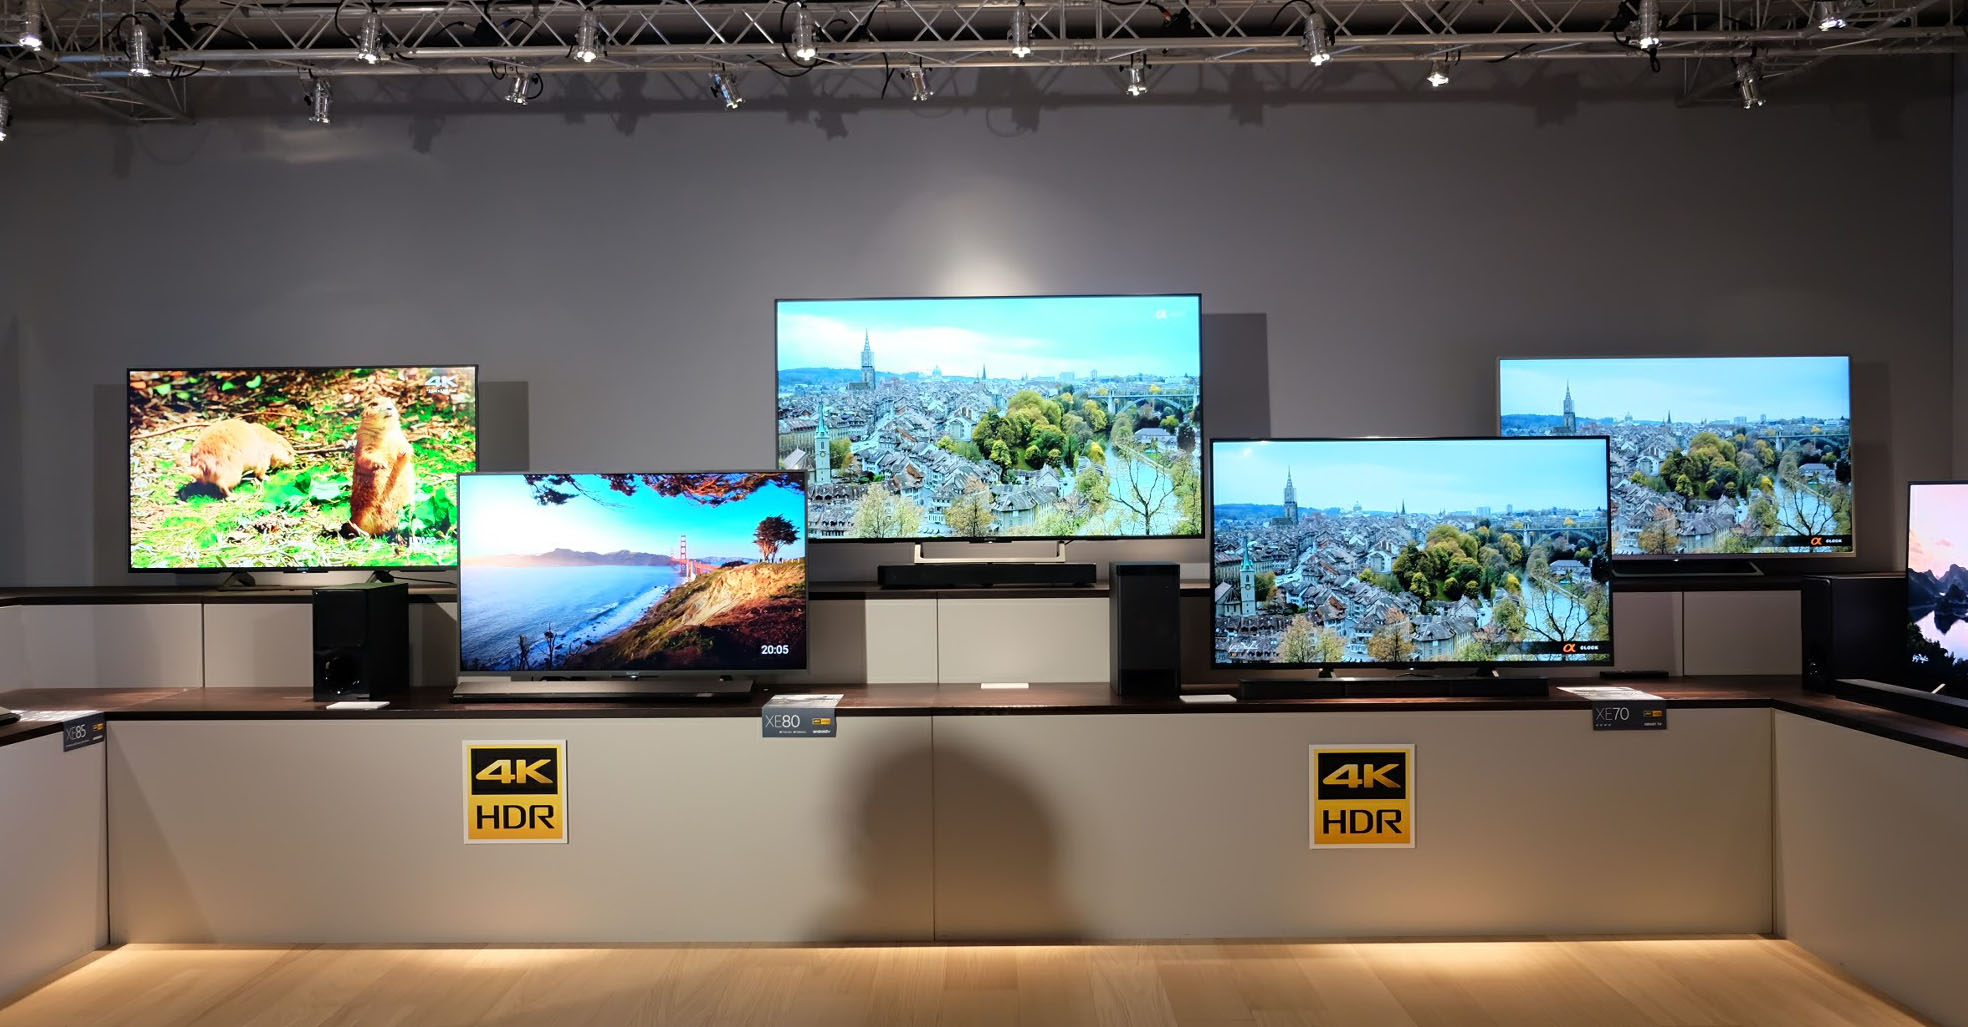 Sony 2017 lineup for 4K HDR TVs